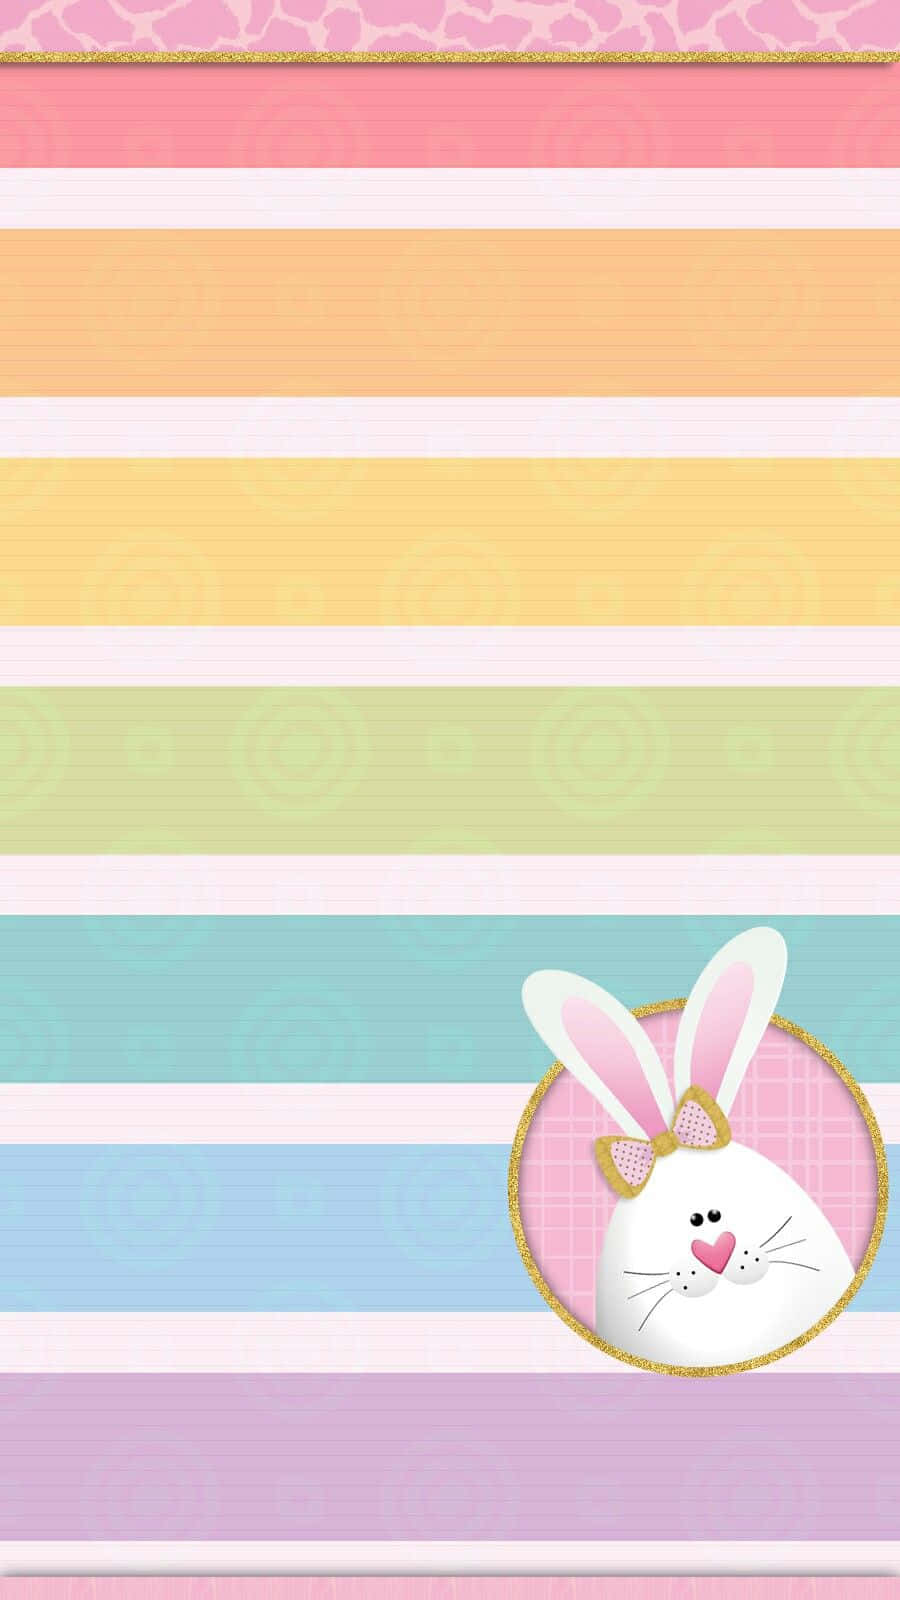 Ready for Easter? Decorate your phone with this adorable bunny and egg wallpaper Wallpaper